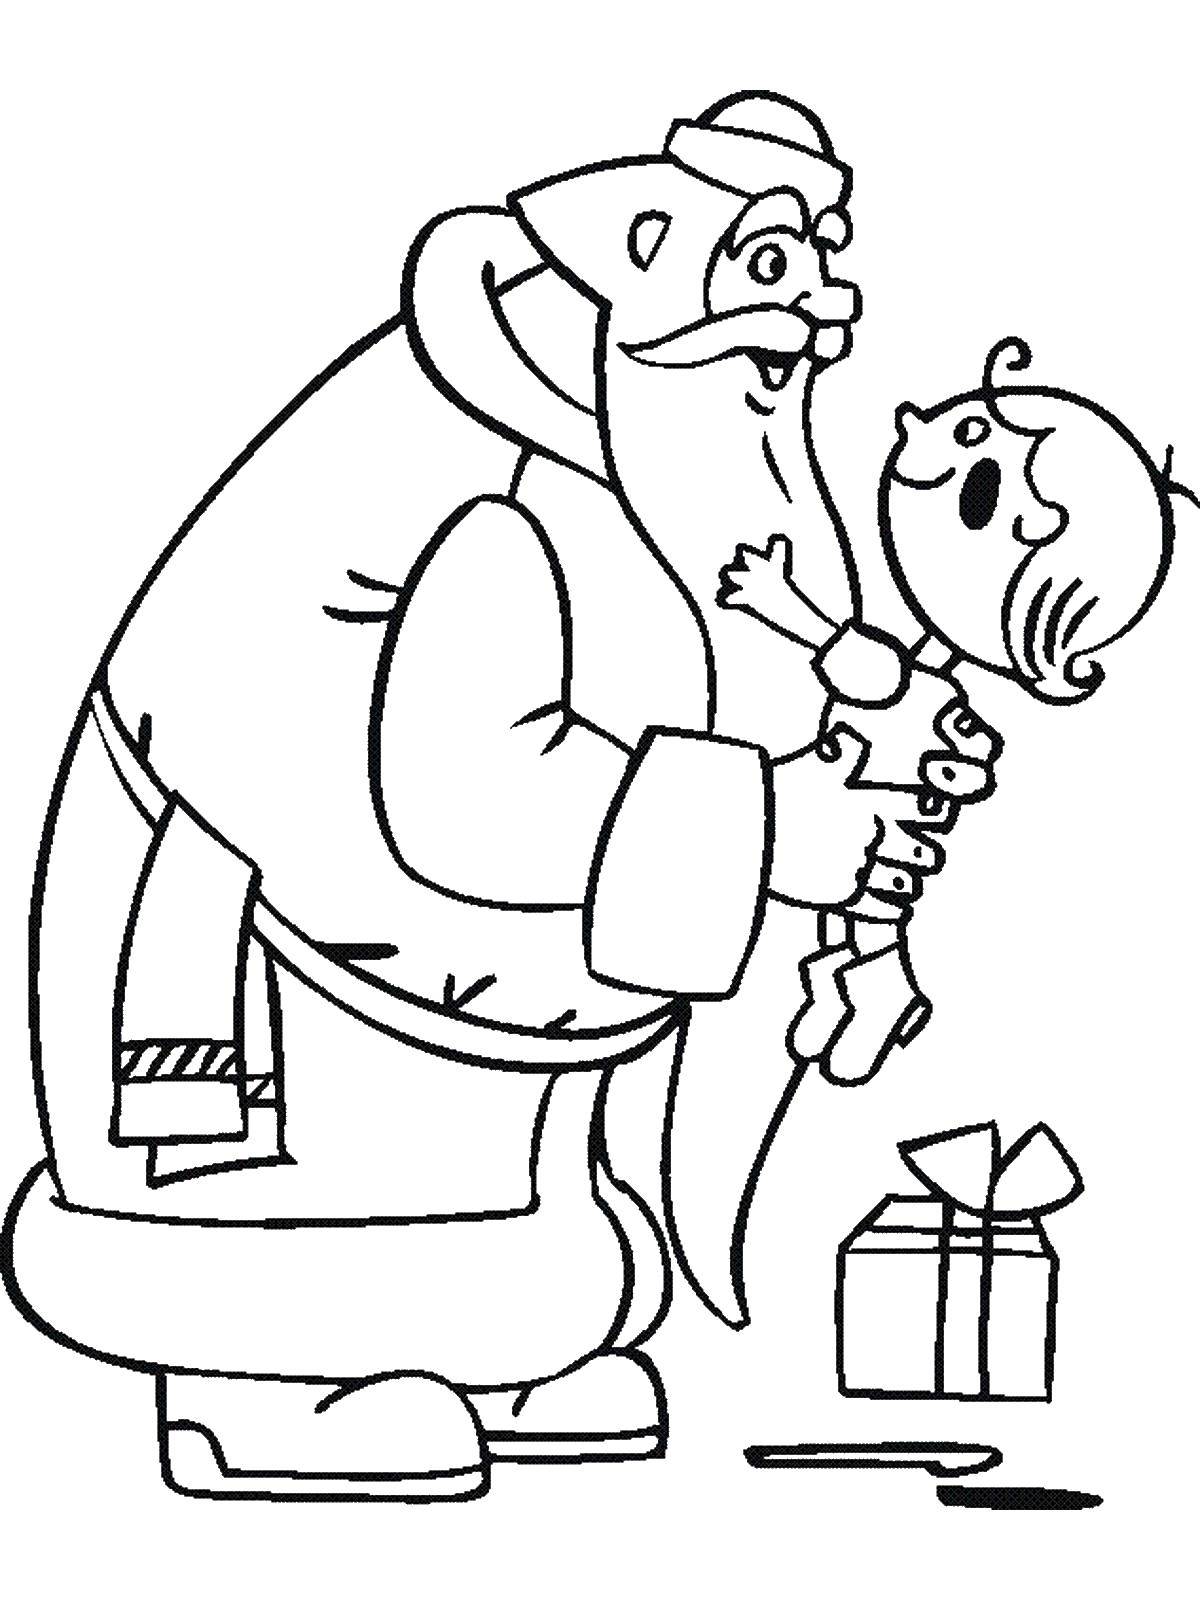 Coloring Santa Claus gives a gift to the baby. Category Santa Claus. Tags:  New Year, Santa Claus, Santa Claus, gifts.